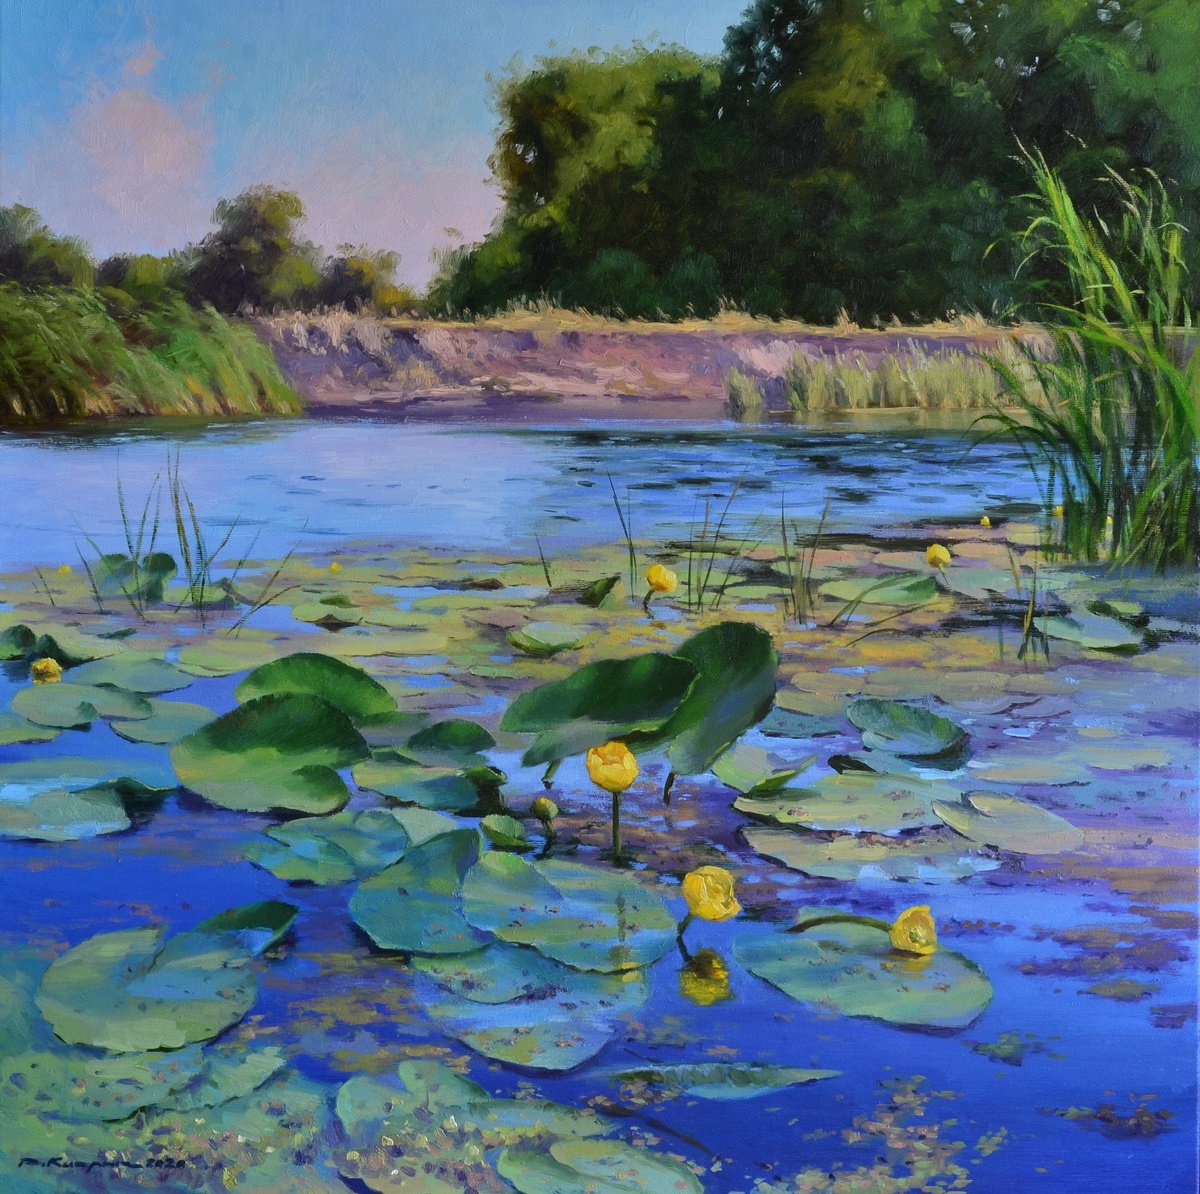 Water lilies on a sunny day by Ruslan Kiprych